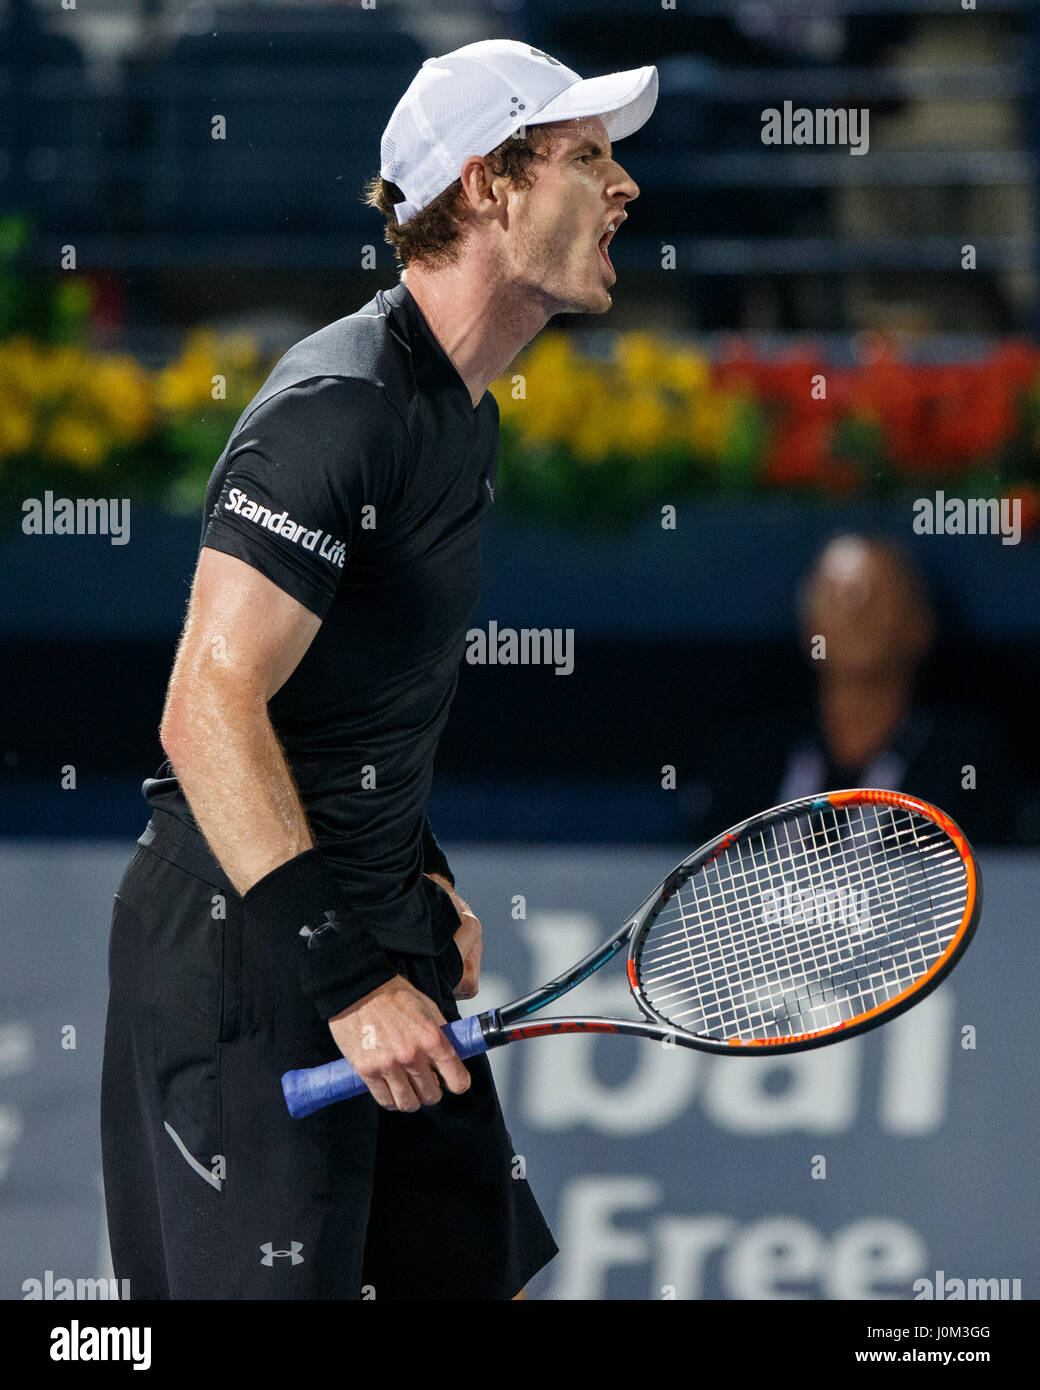 Andy Murray High Resolution Stock Photography and Images - Alamy